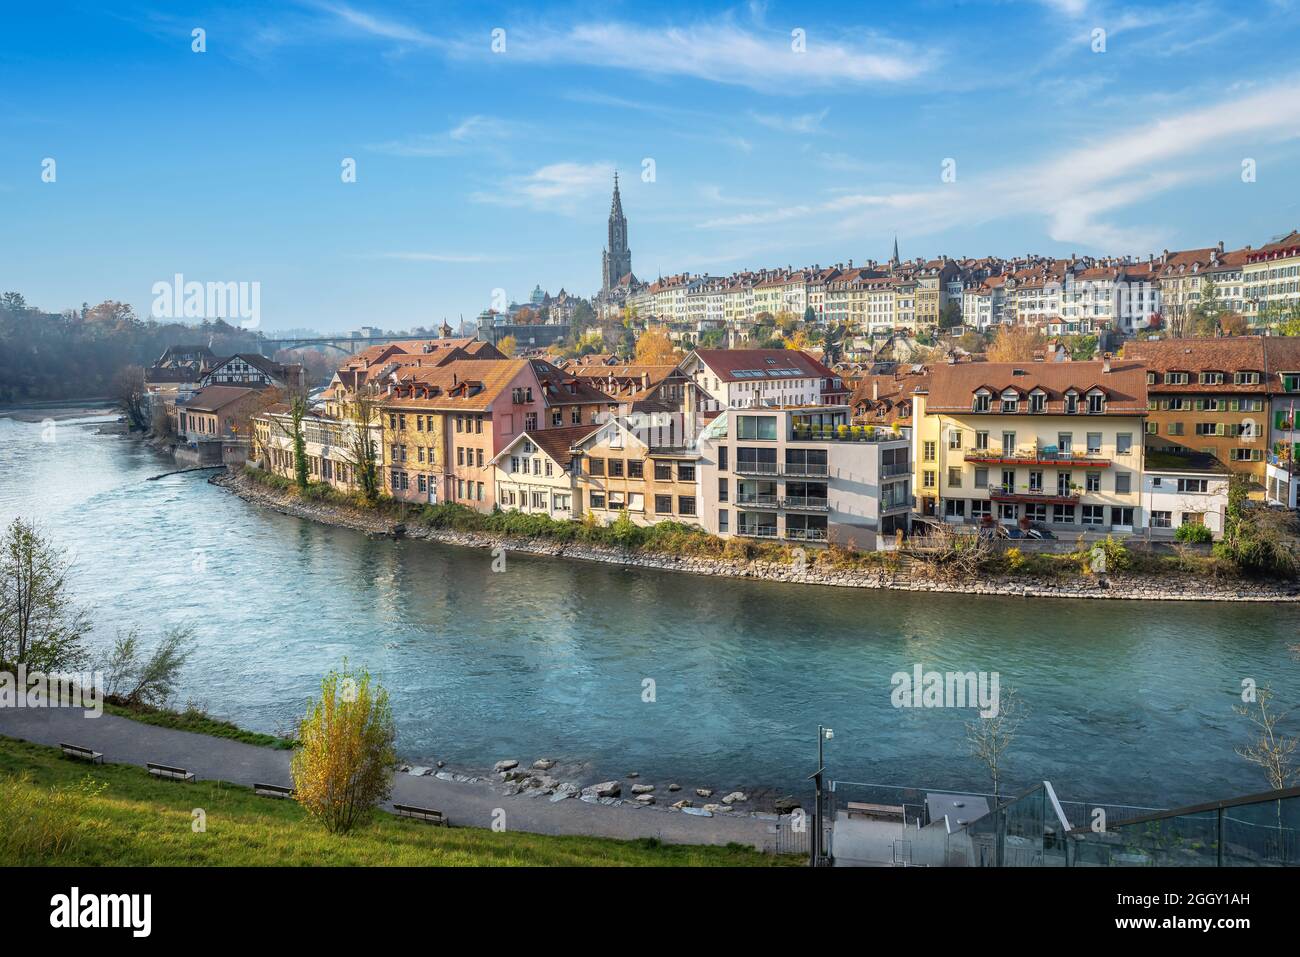 Bern city Skyline with Aare river and Bern Minster Cathedral tower on background - Bern, Switzerland Stock Photo